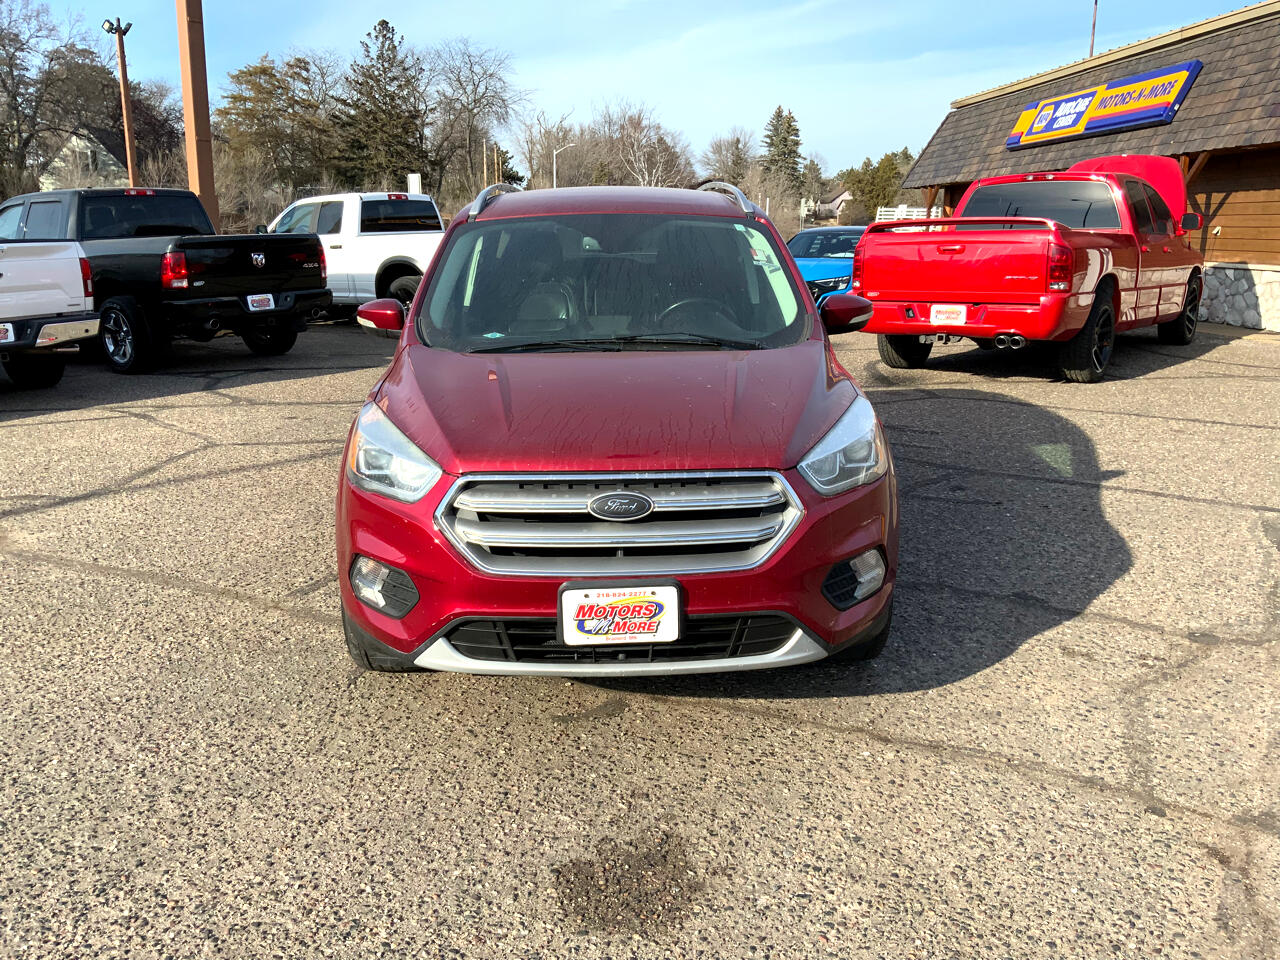 Used 2017 Ford Escape Titanium with VIN 1FMCU9J9XHUD68284 for sale in Brainerd, Minnesota